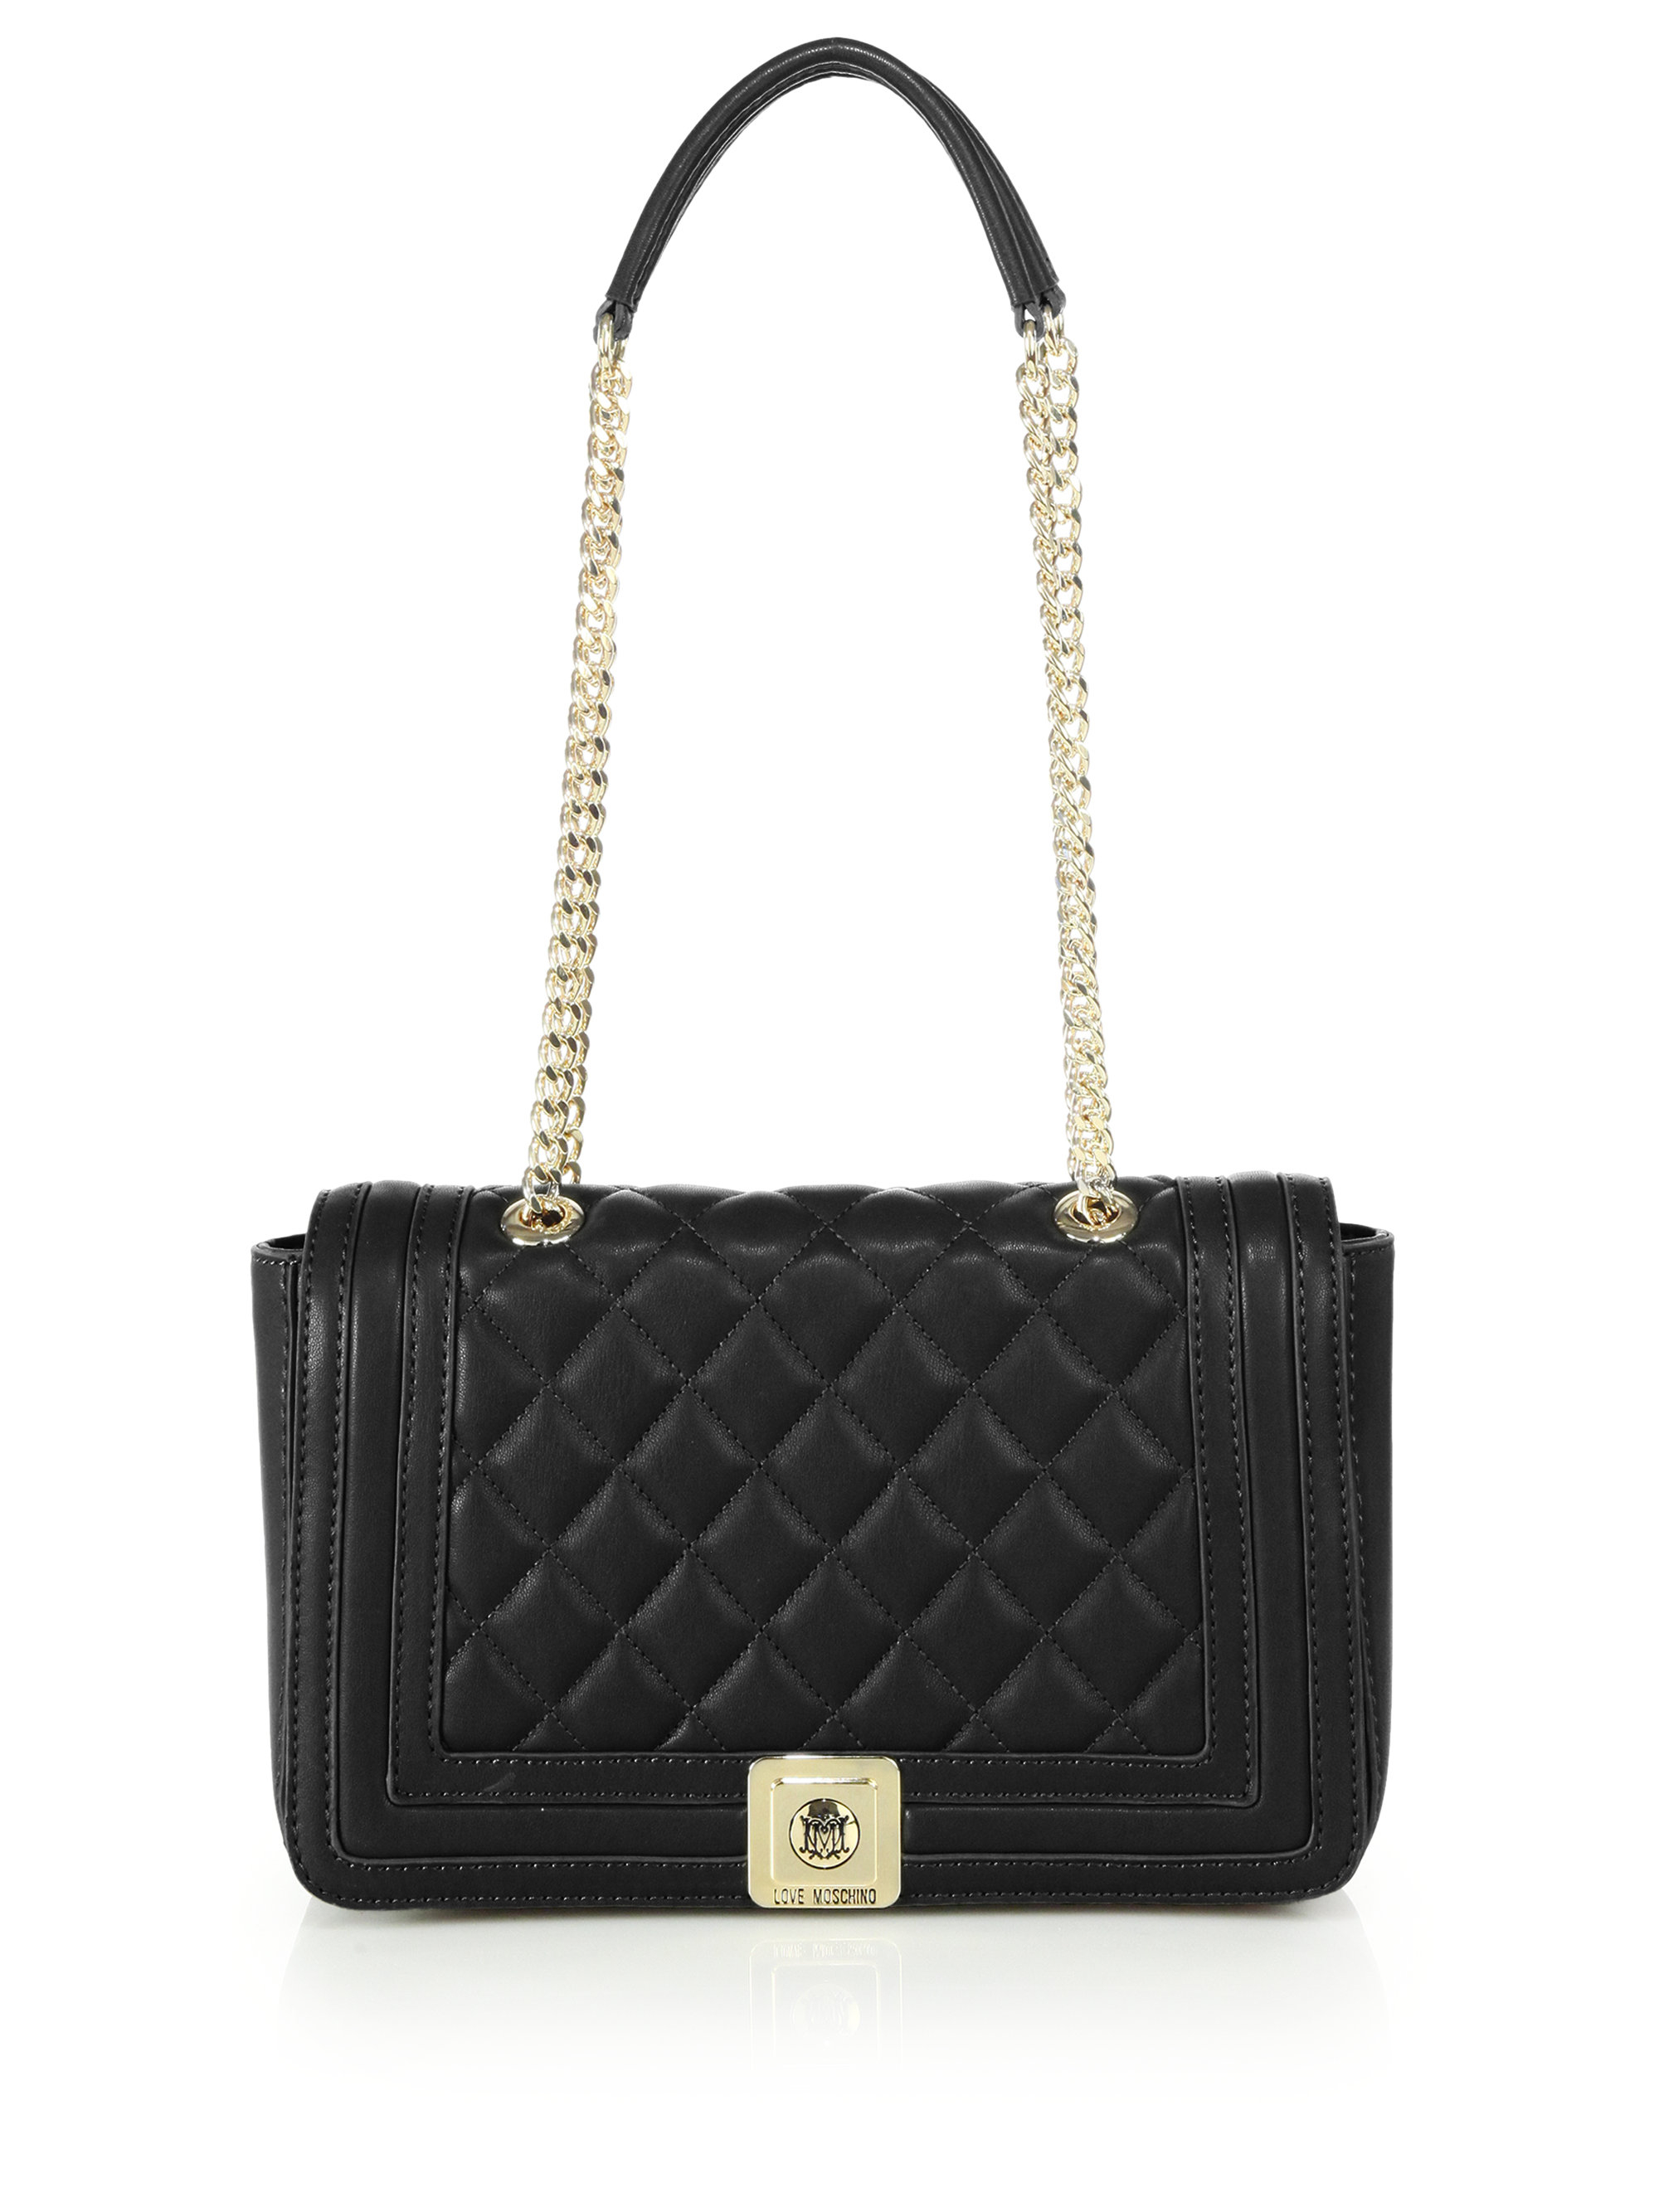 Love Moschino Quilted Faux Leather Chain Strap Shoulder Bag | NAR Media Kit